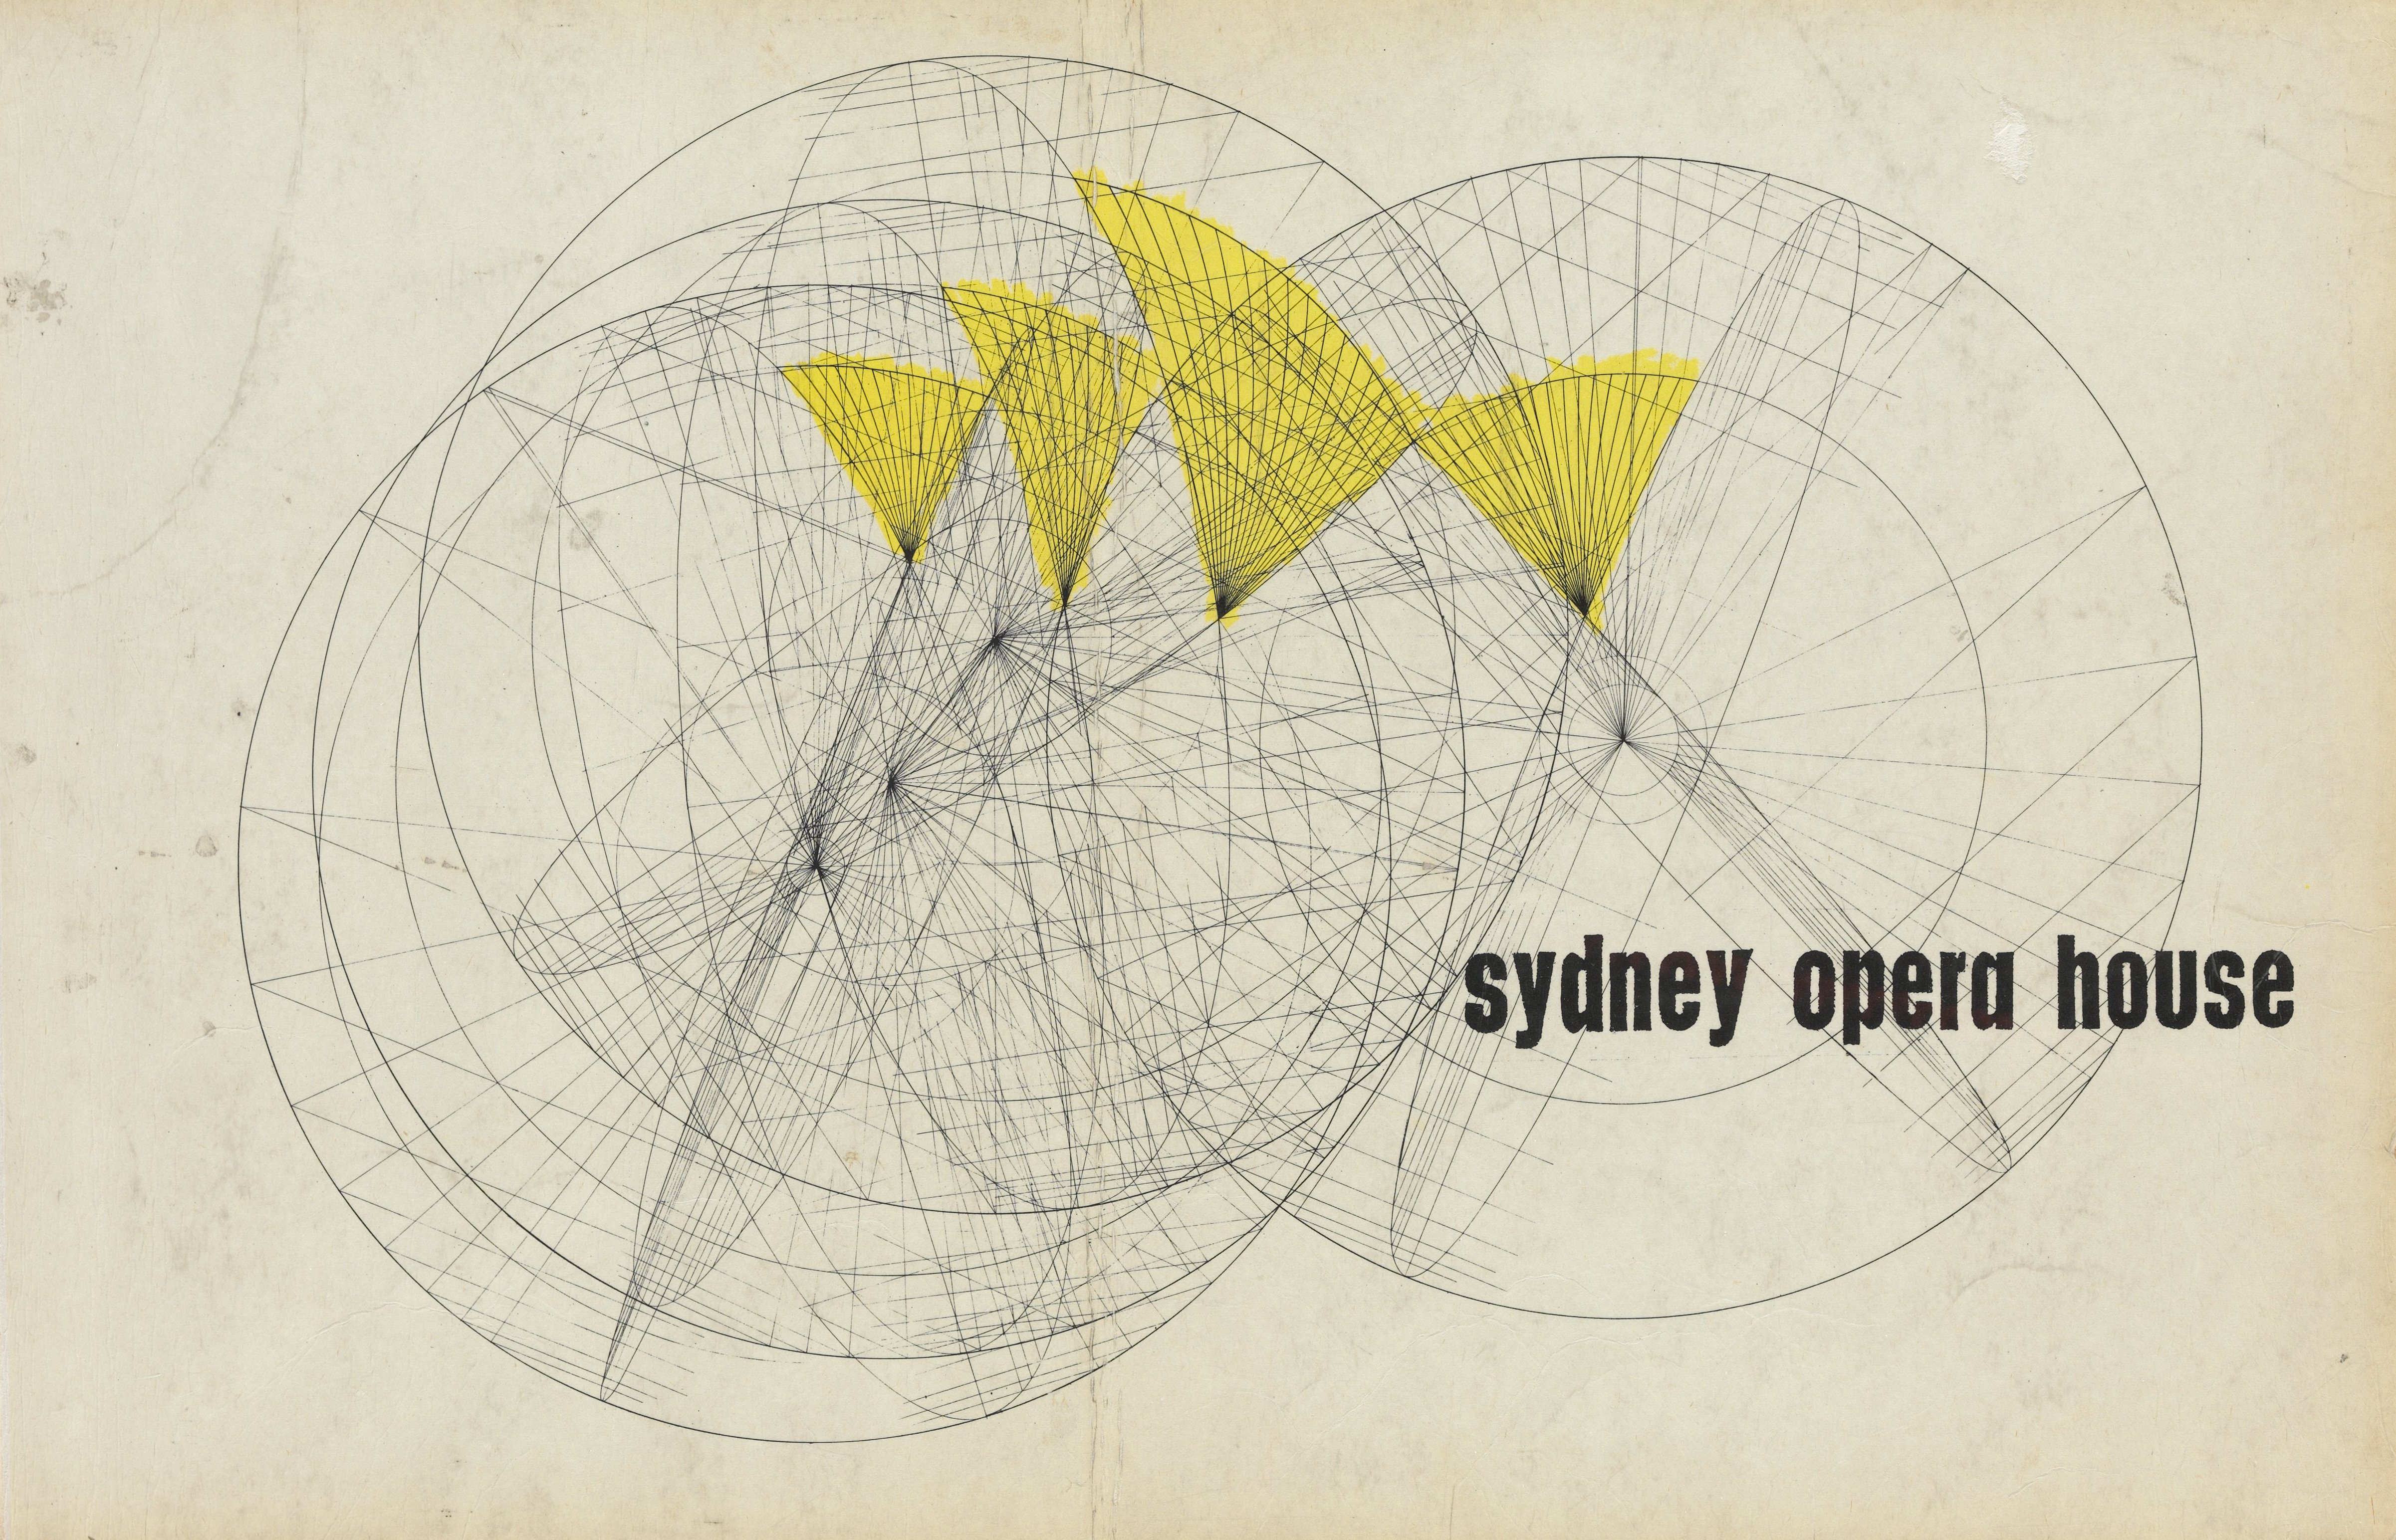 Sydney Opera House, Bennelong Point, Sydney: front cover of the Yellow Book. Image Date: 1962